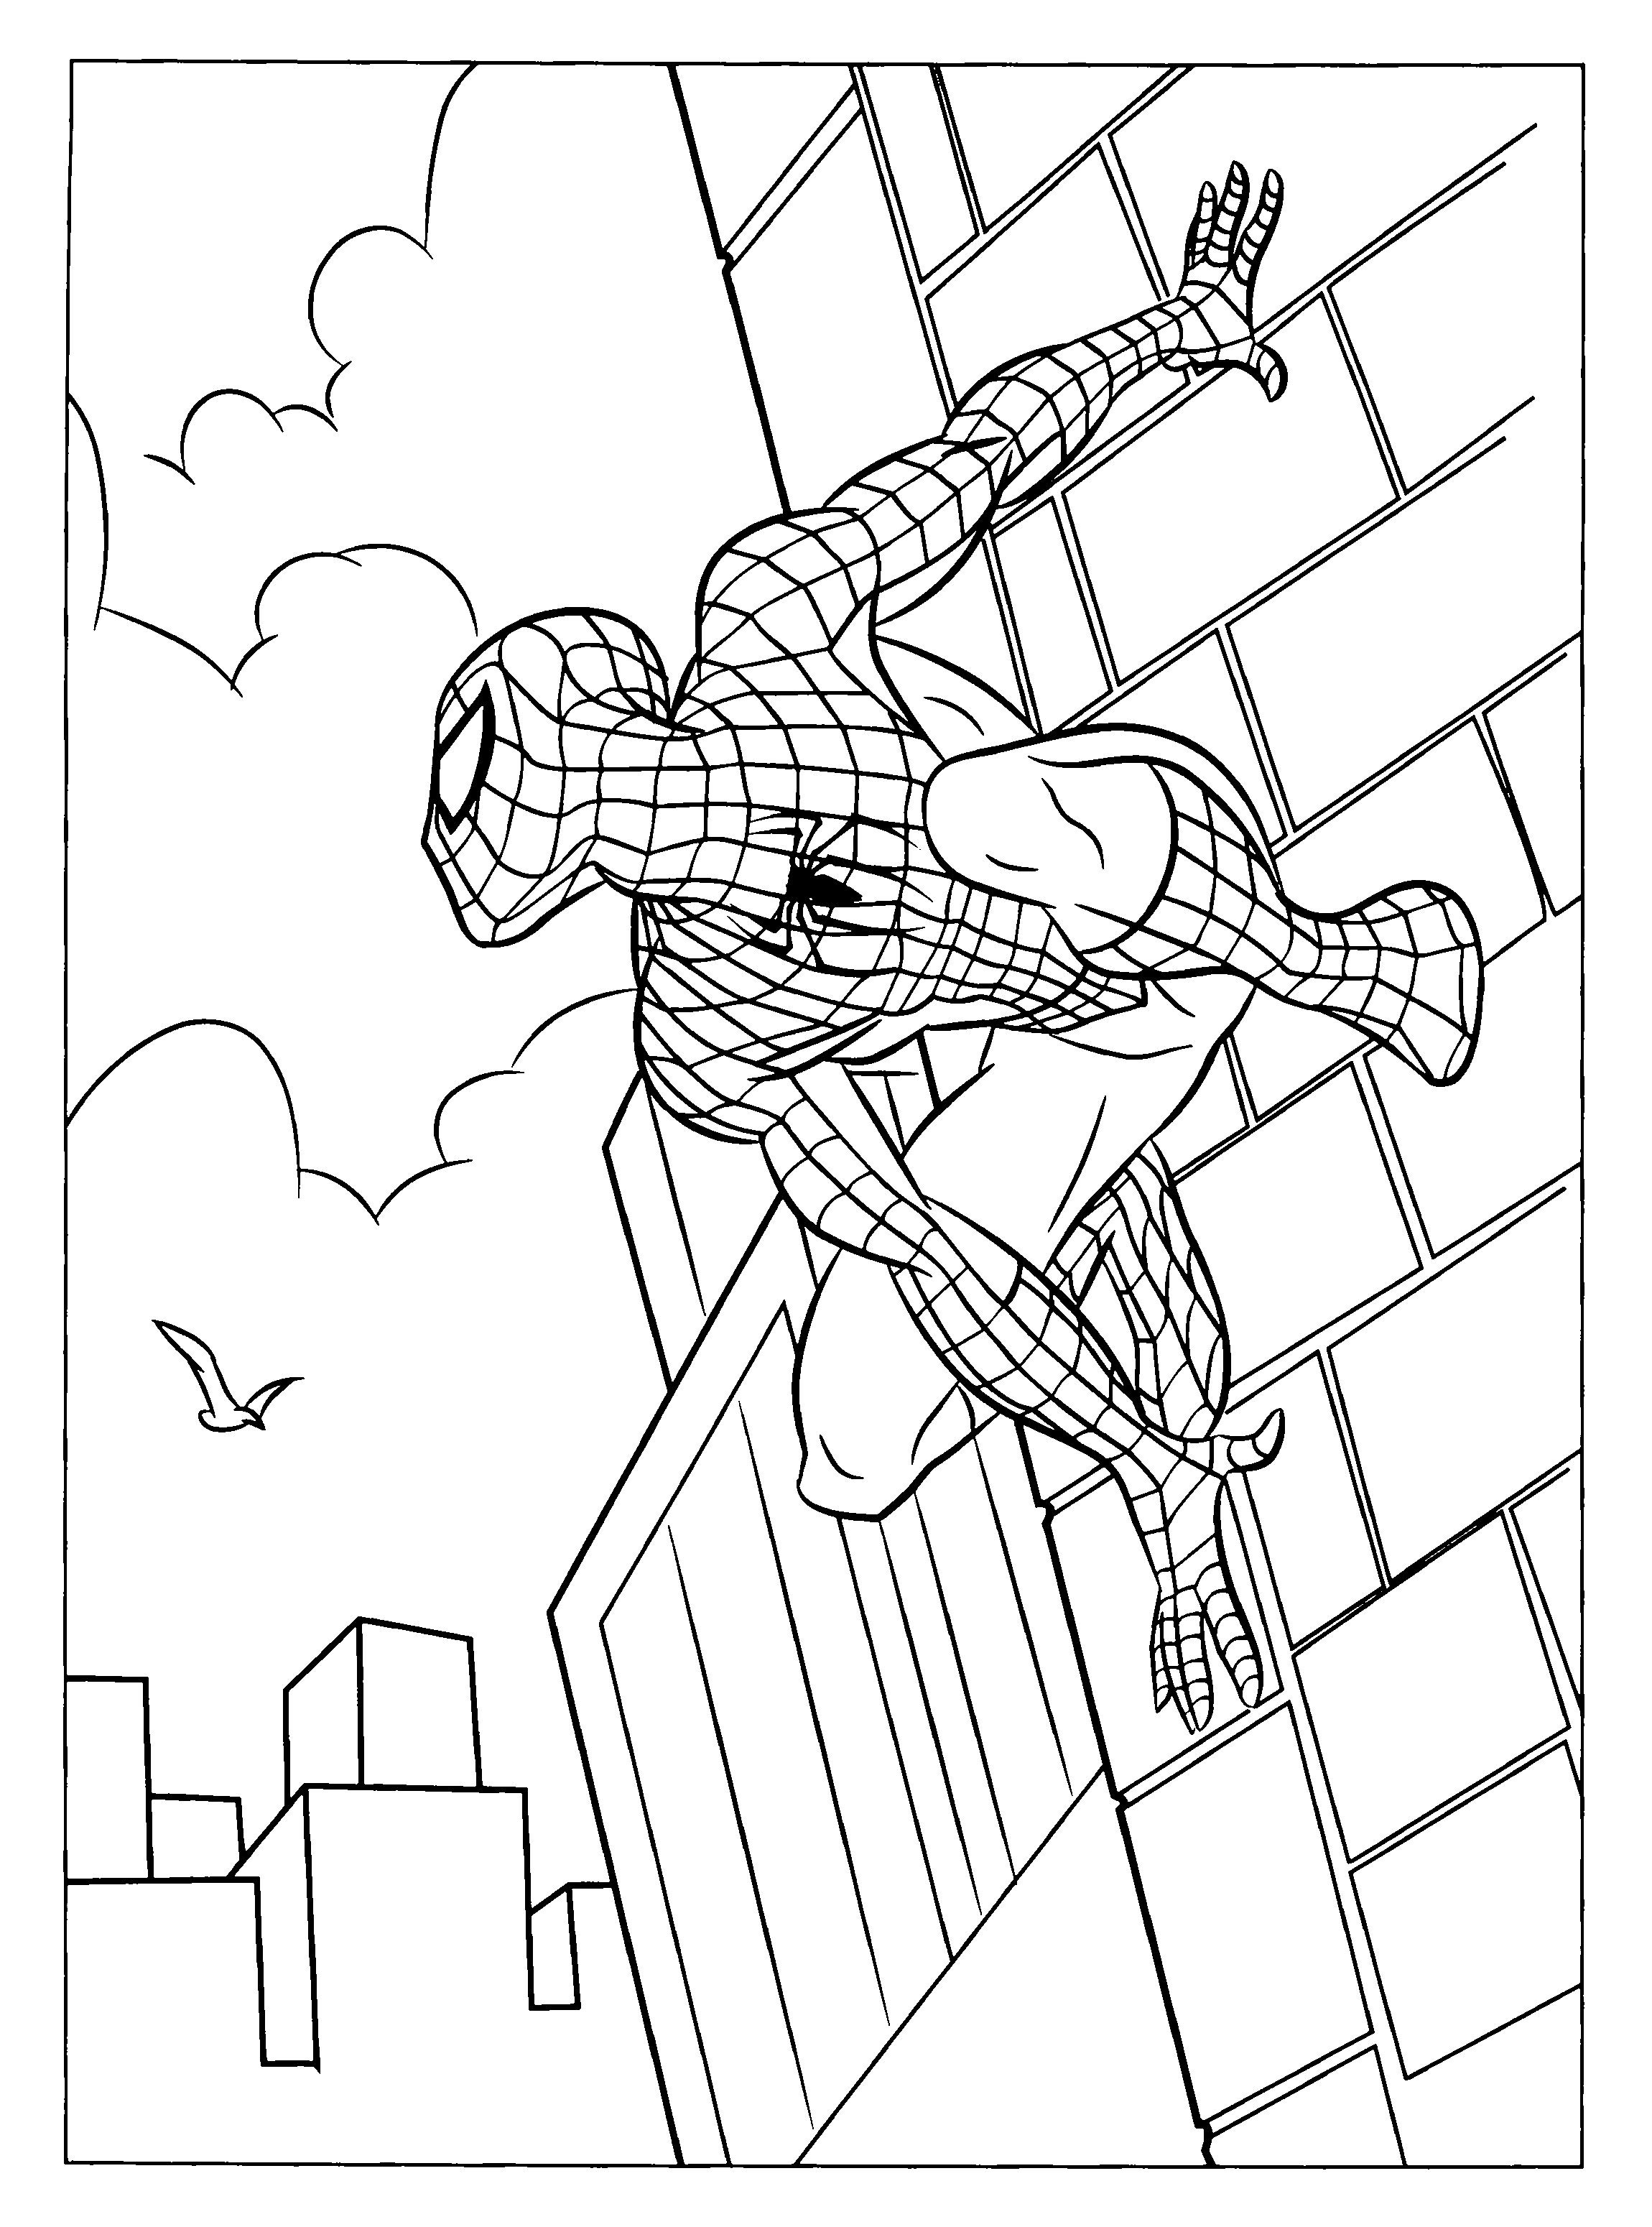 spiderman colouring pages printable amy blogs it all planning a very spidey 3rd birthday party spiderman colouring pages printable 